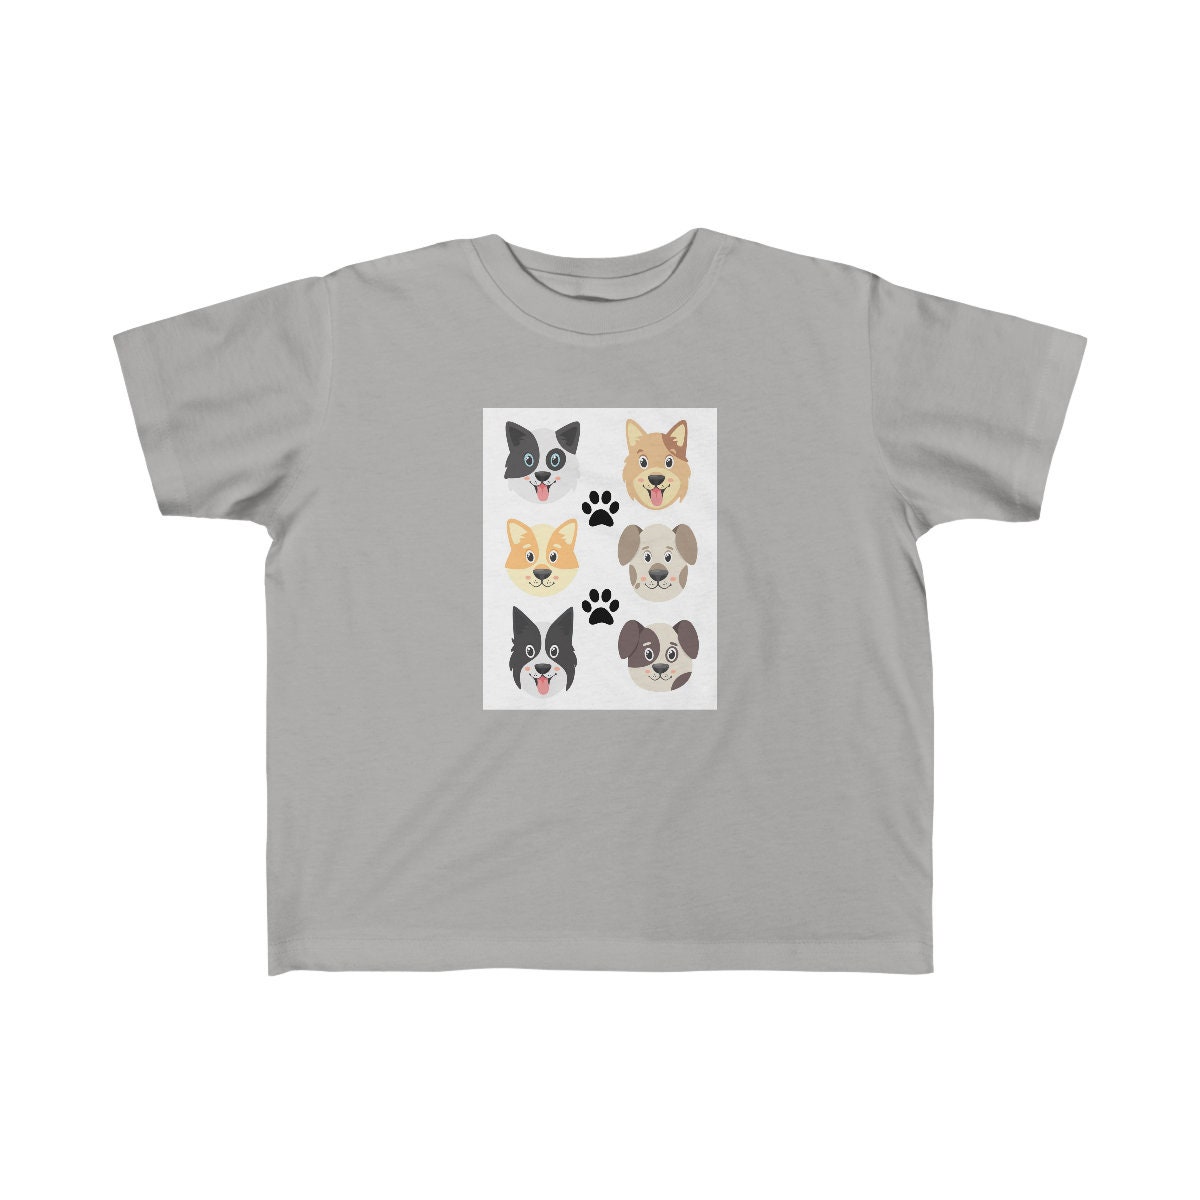 Cute Dog Faces With Paws T-shirt Sizes 2T-6T Soft Fabric - Etsy